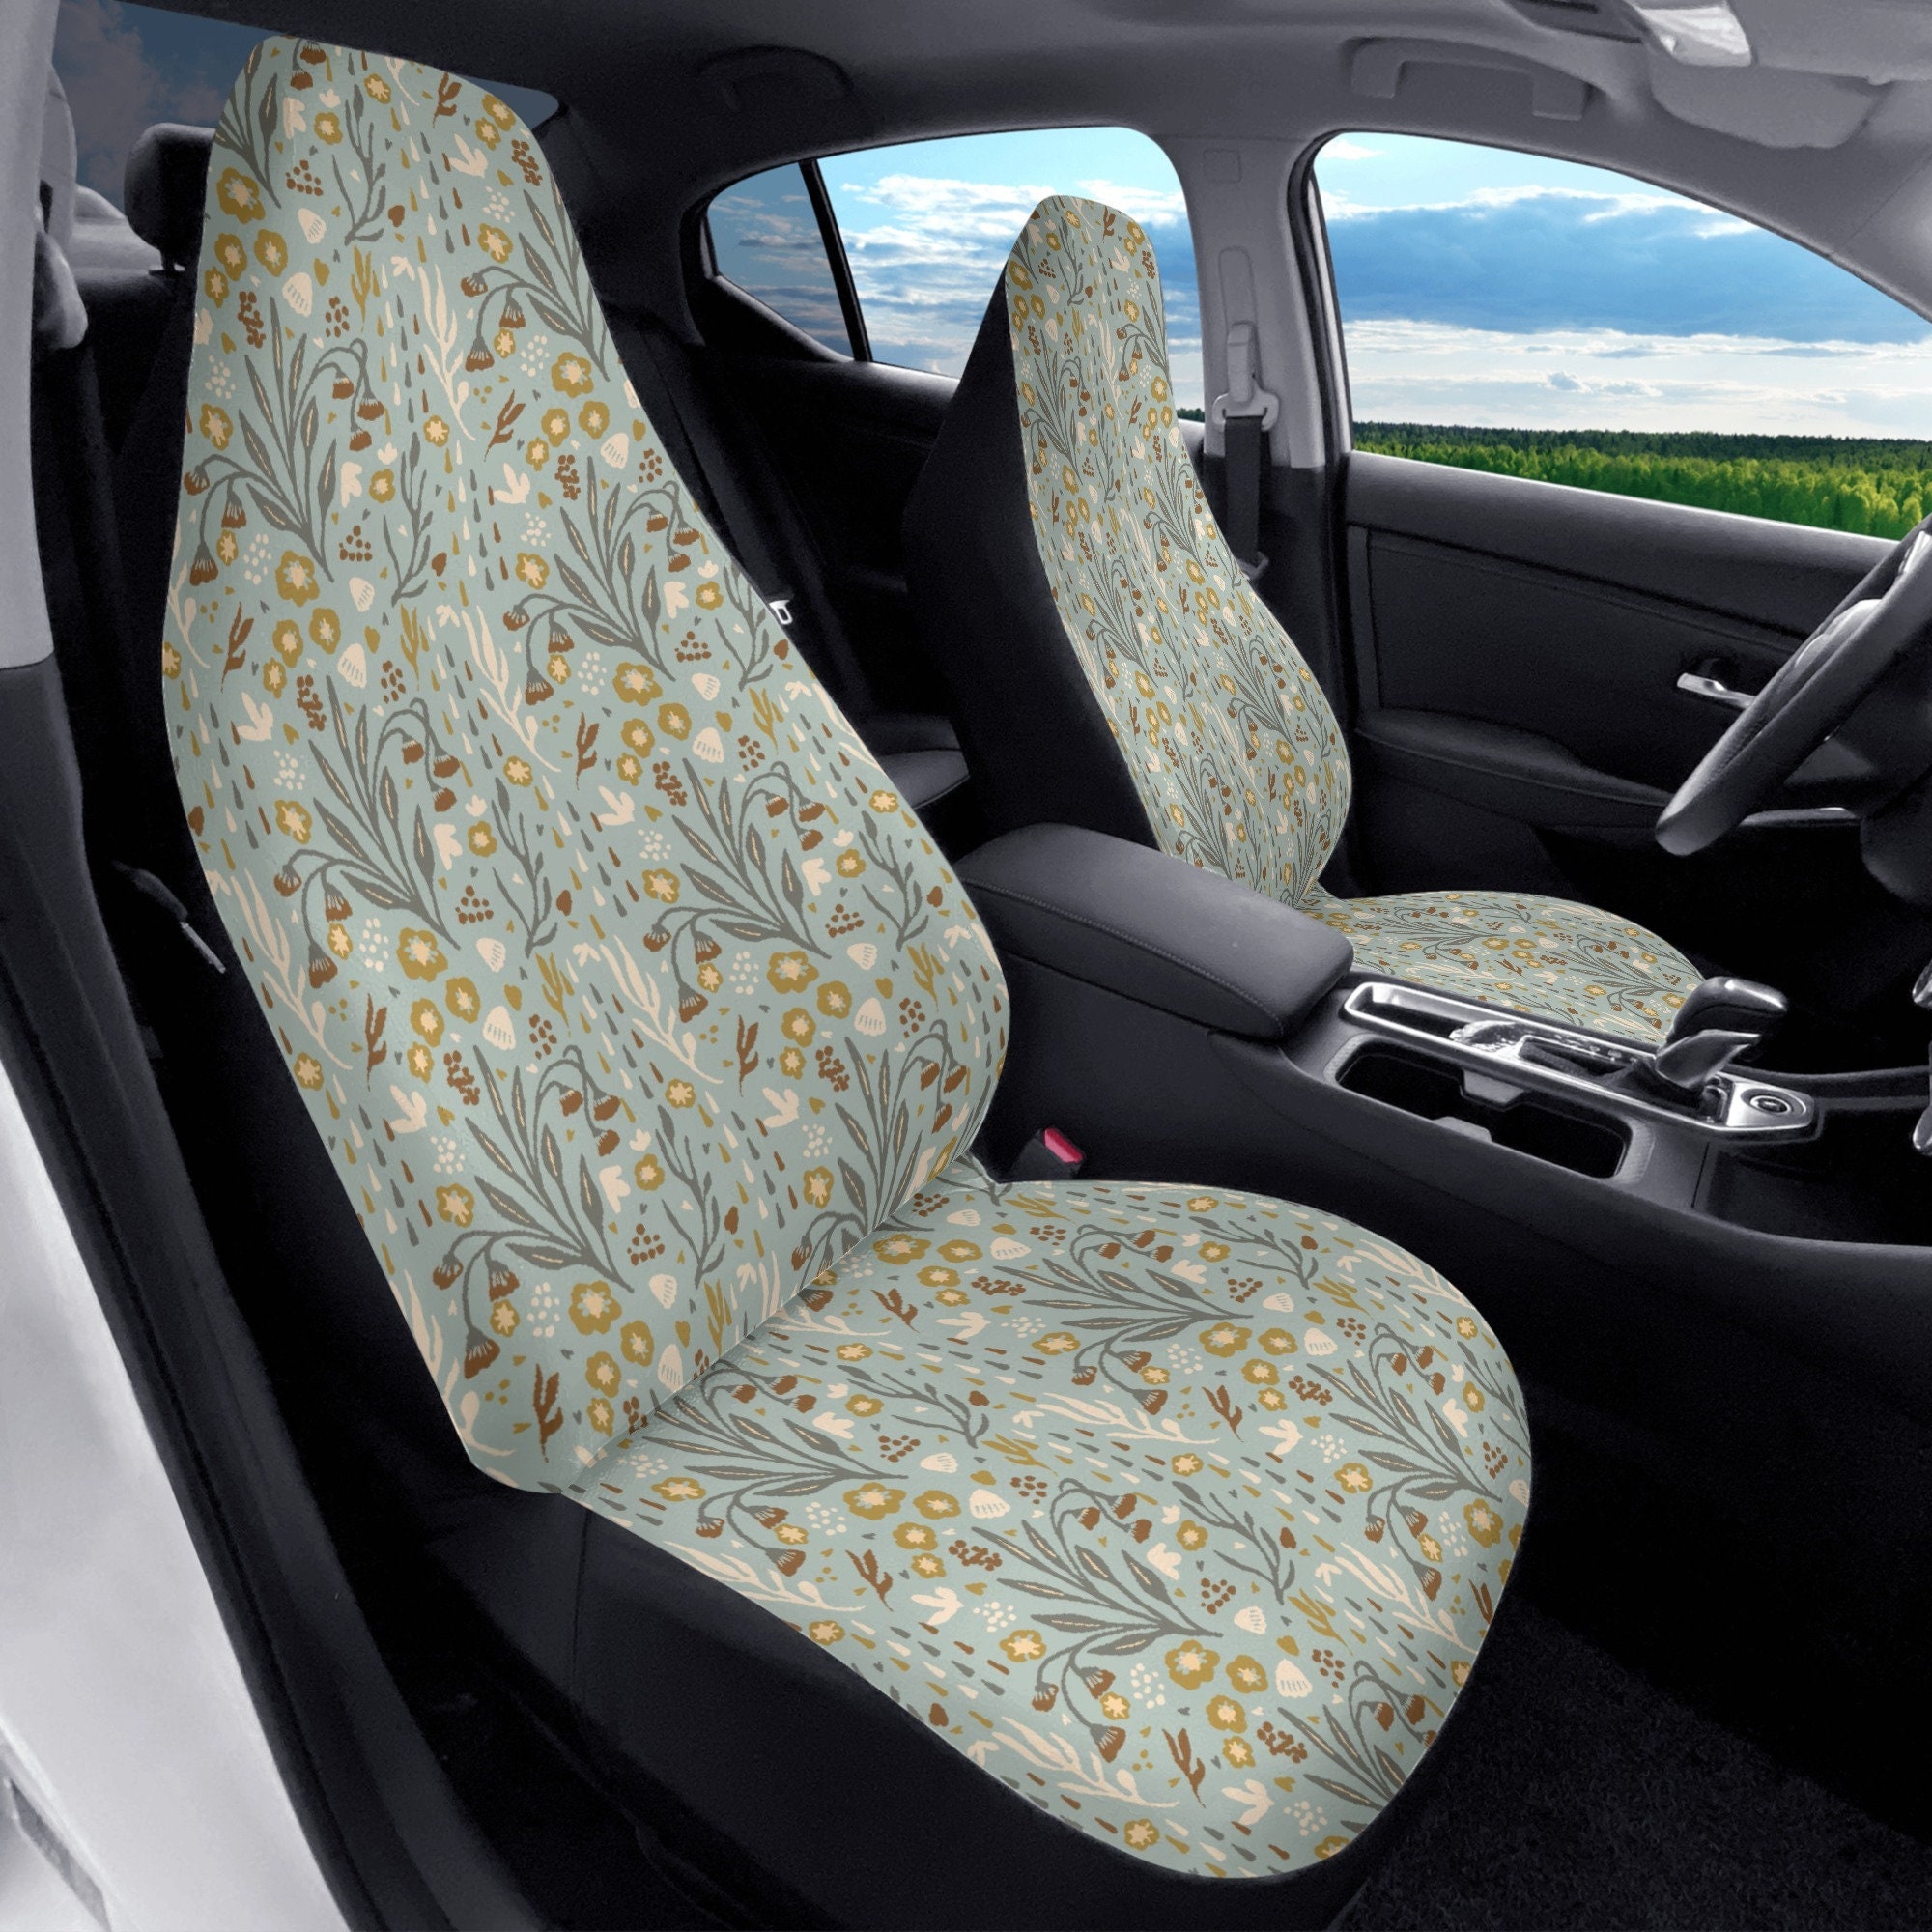 Honda Fit Seat Covers - Etsy